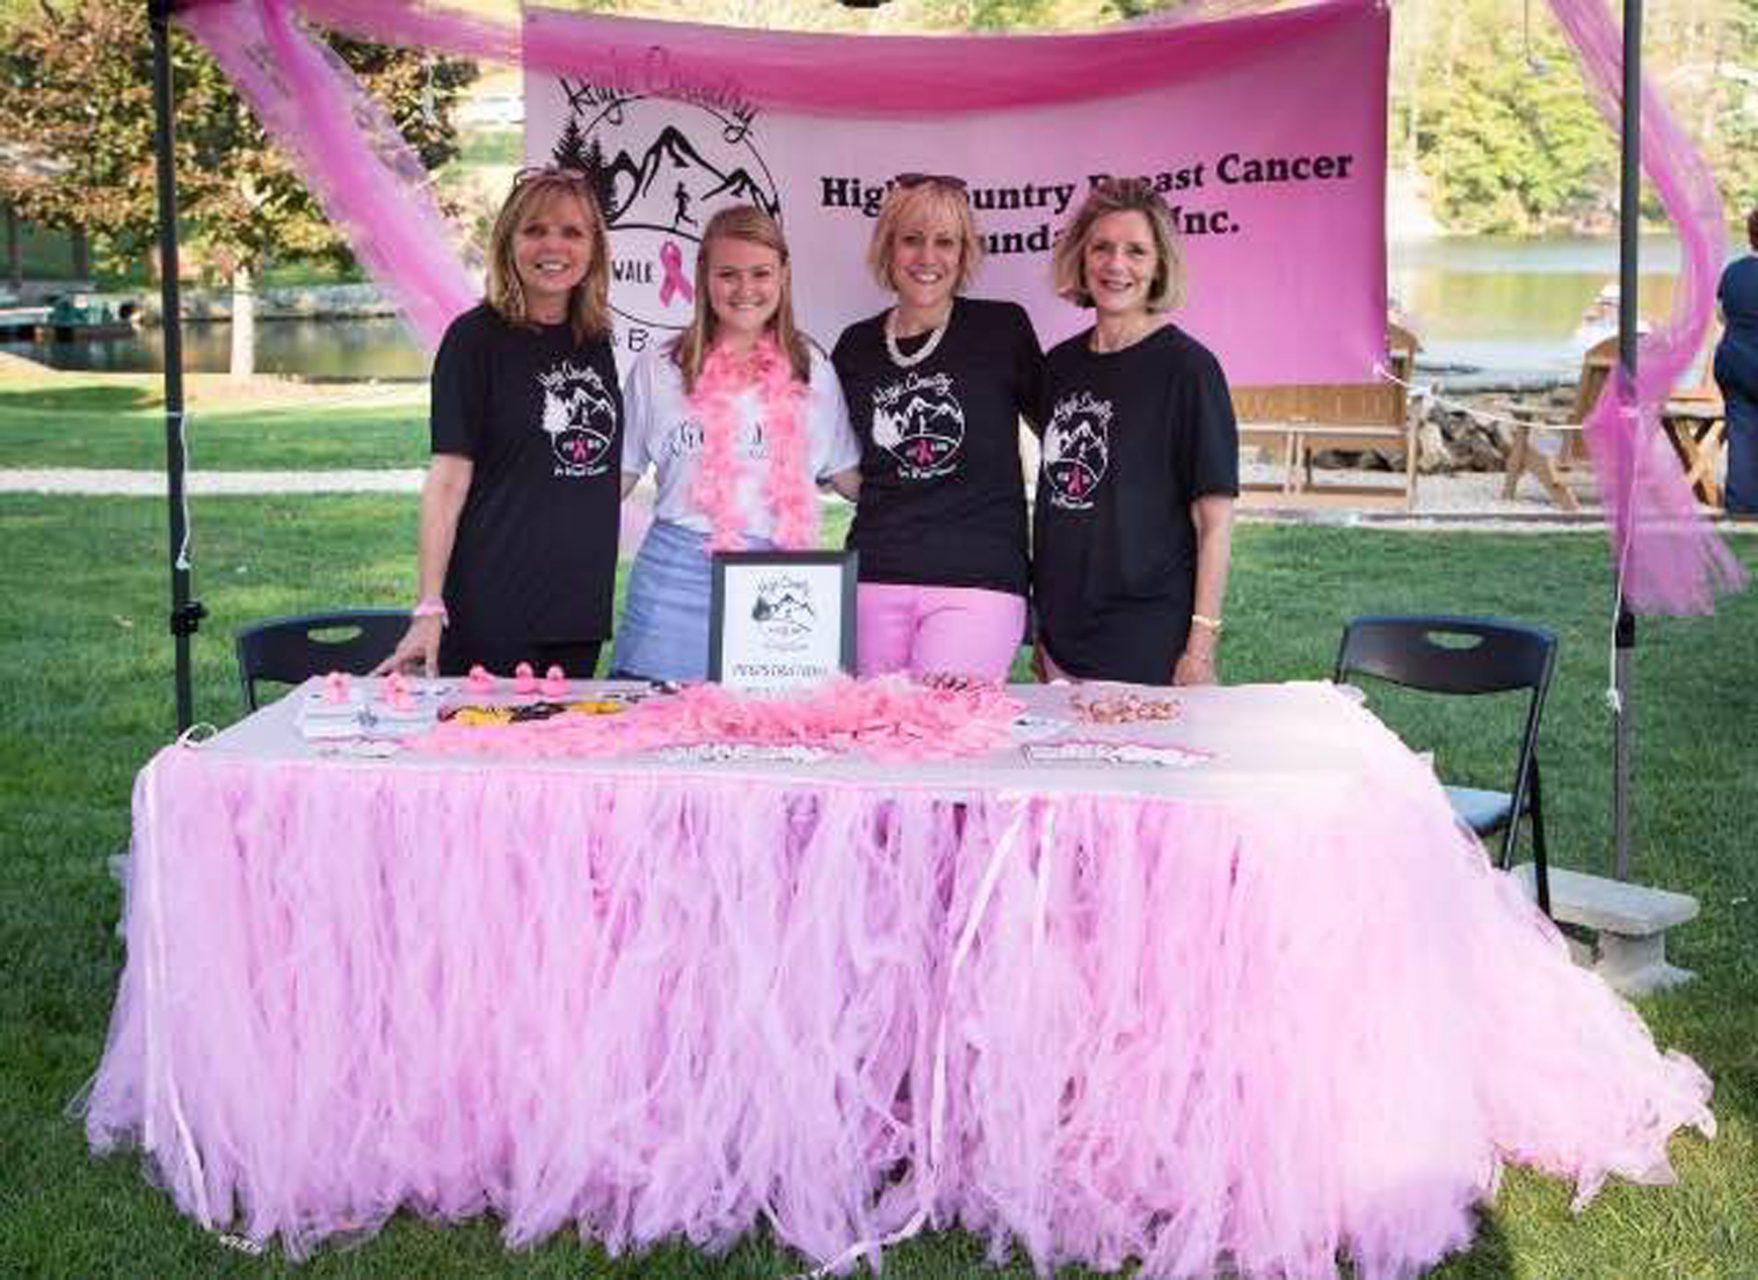 The High Country Breast Cancer Foundation set up a table at the Seby Jones cancer survivors day at Chetola. 